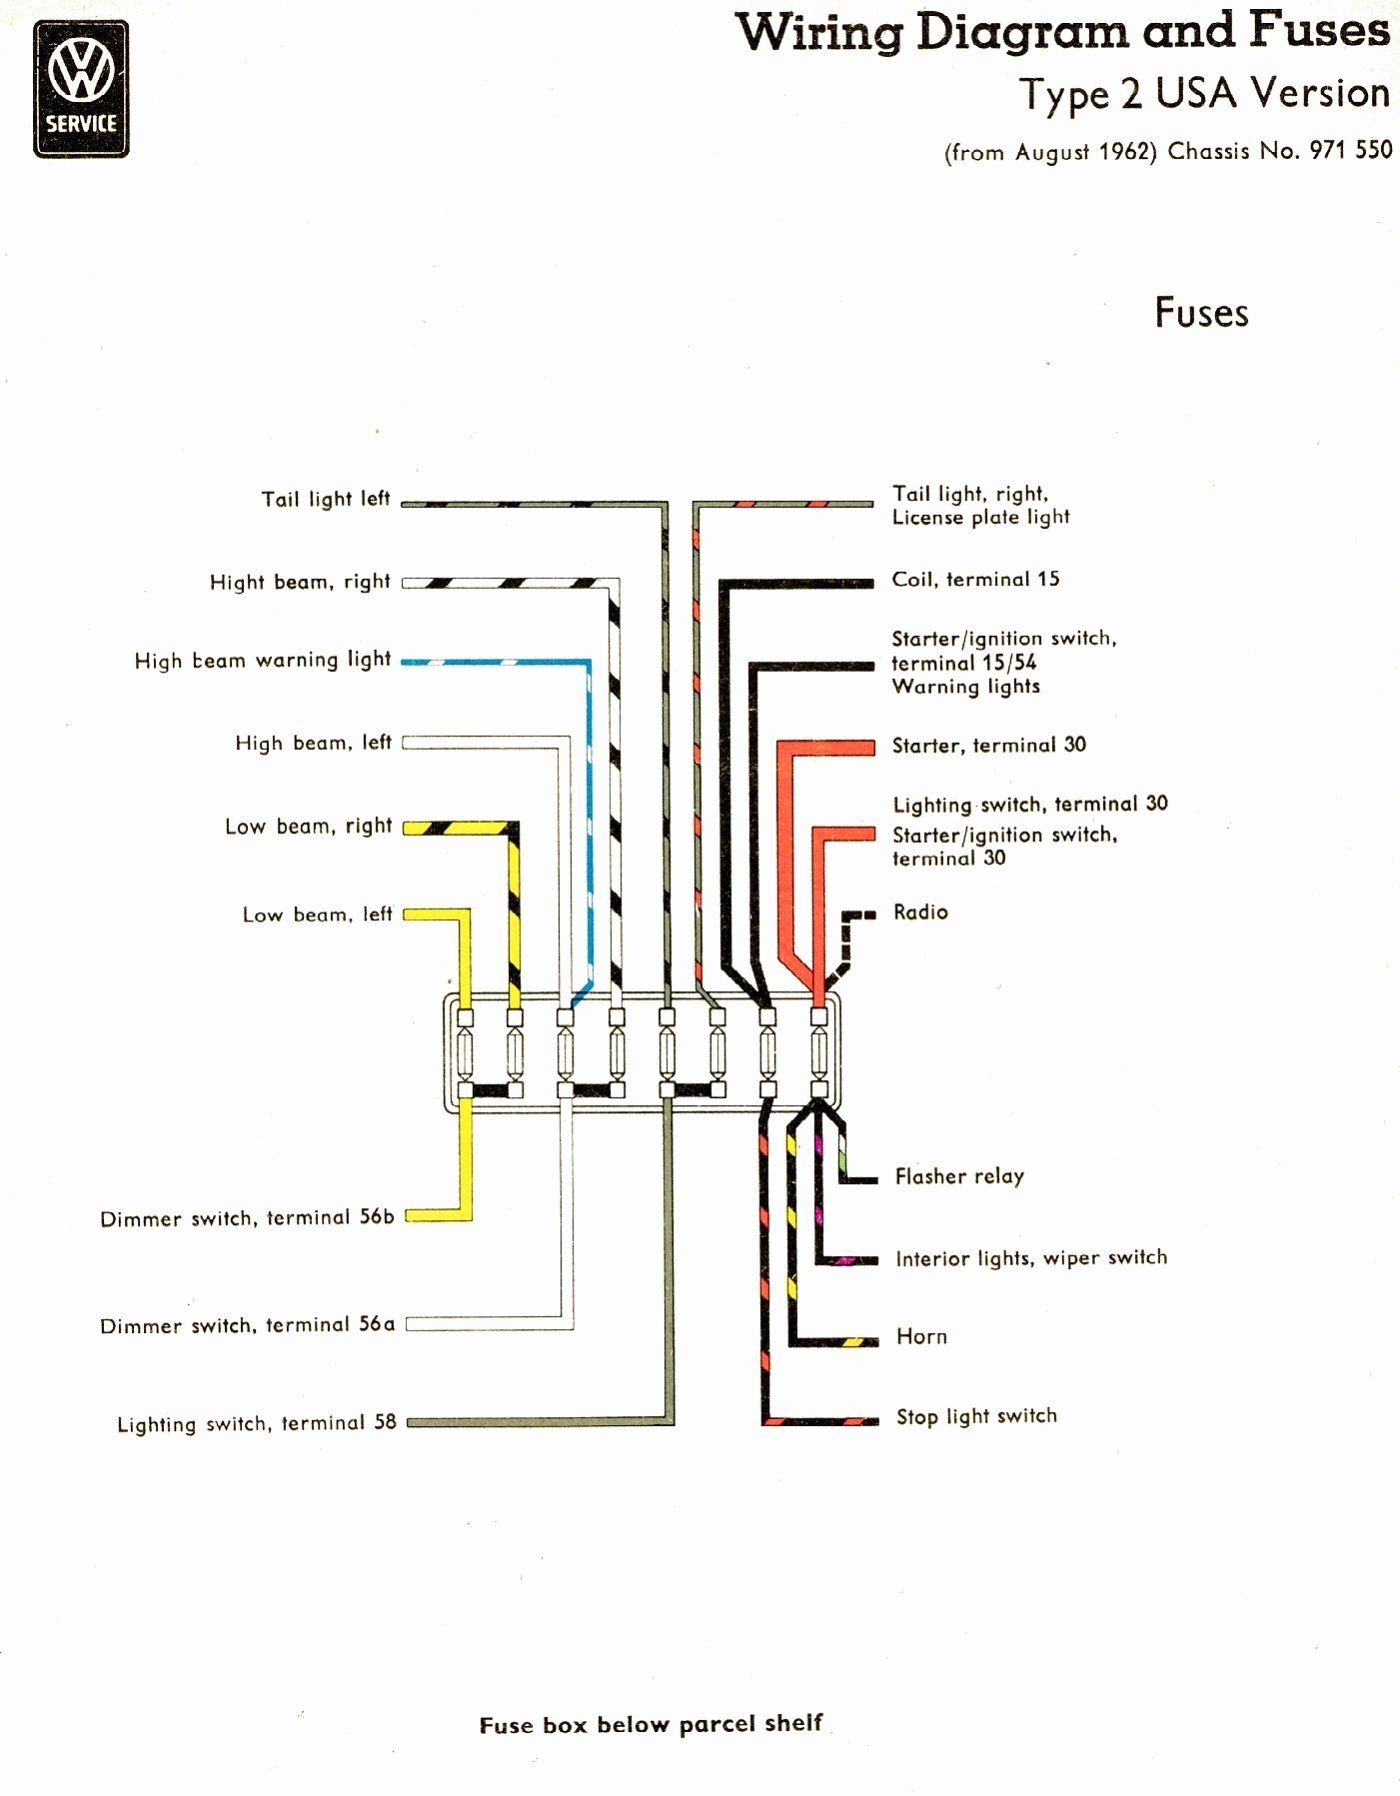 Nos Relay Wiring Diagram Inspirationa Wiring Diagram Coil Wiring Diagram Awesome Index 0 0d 40